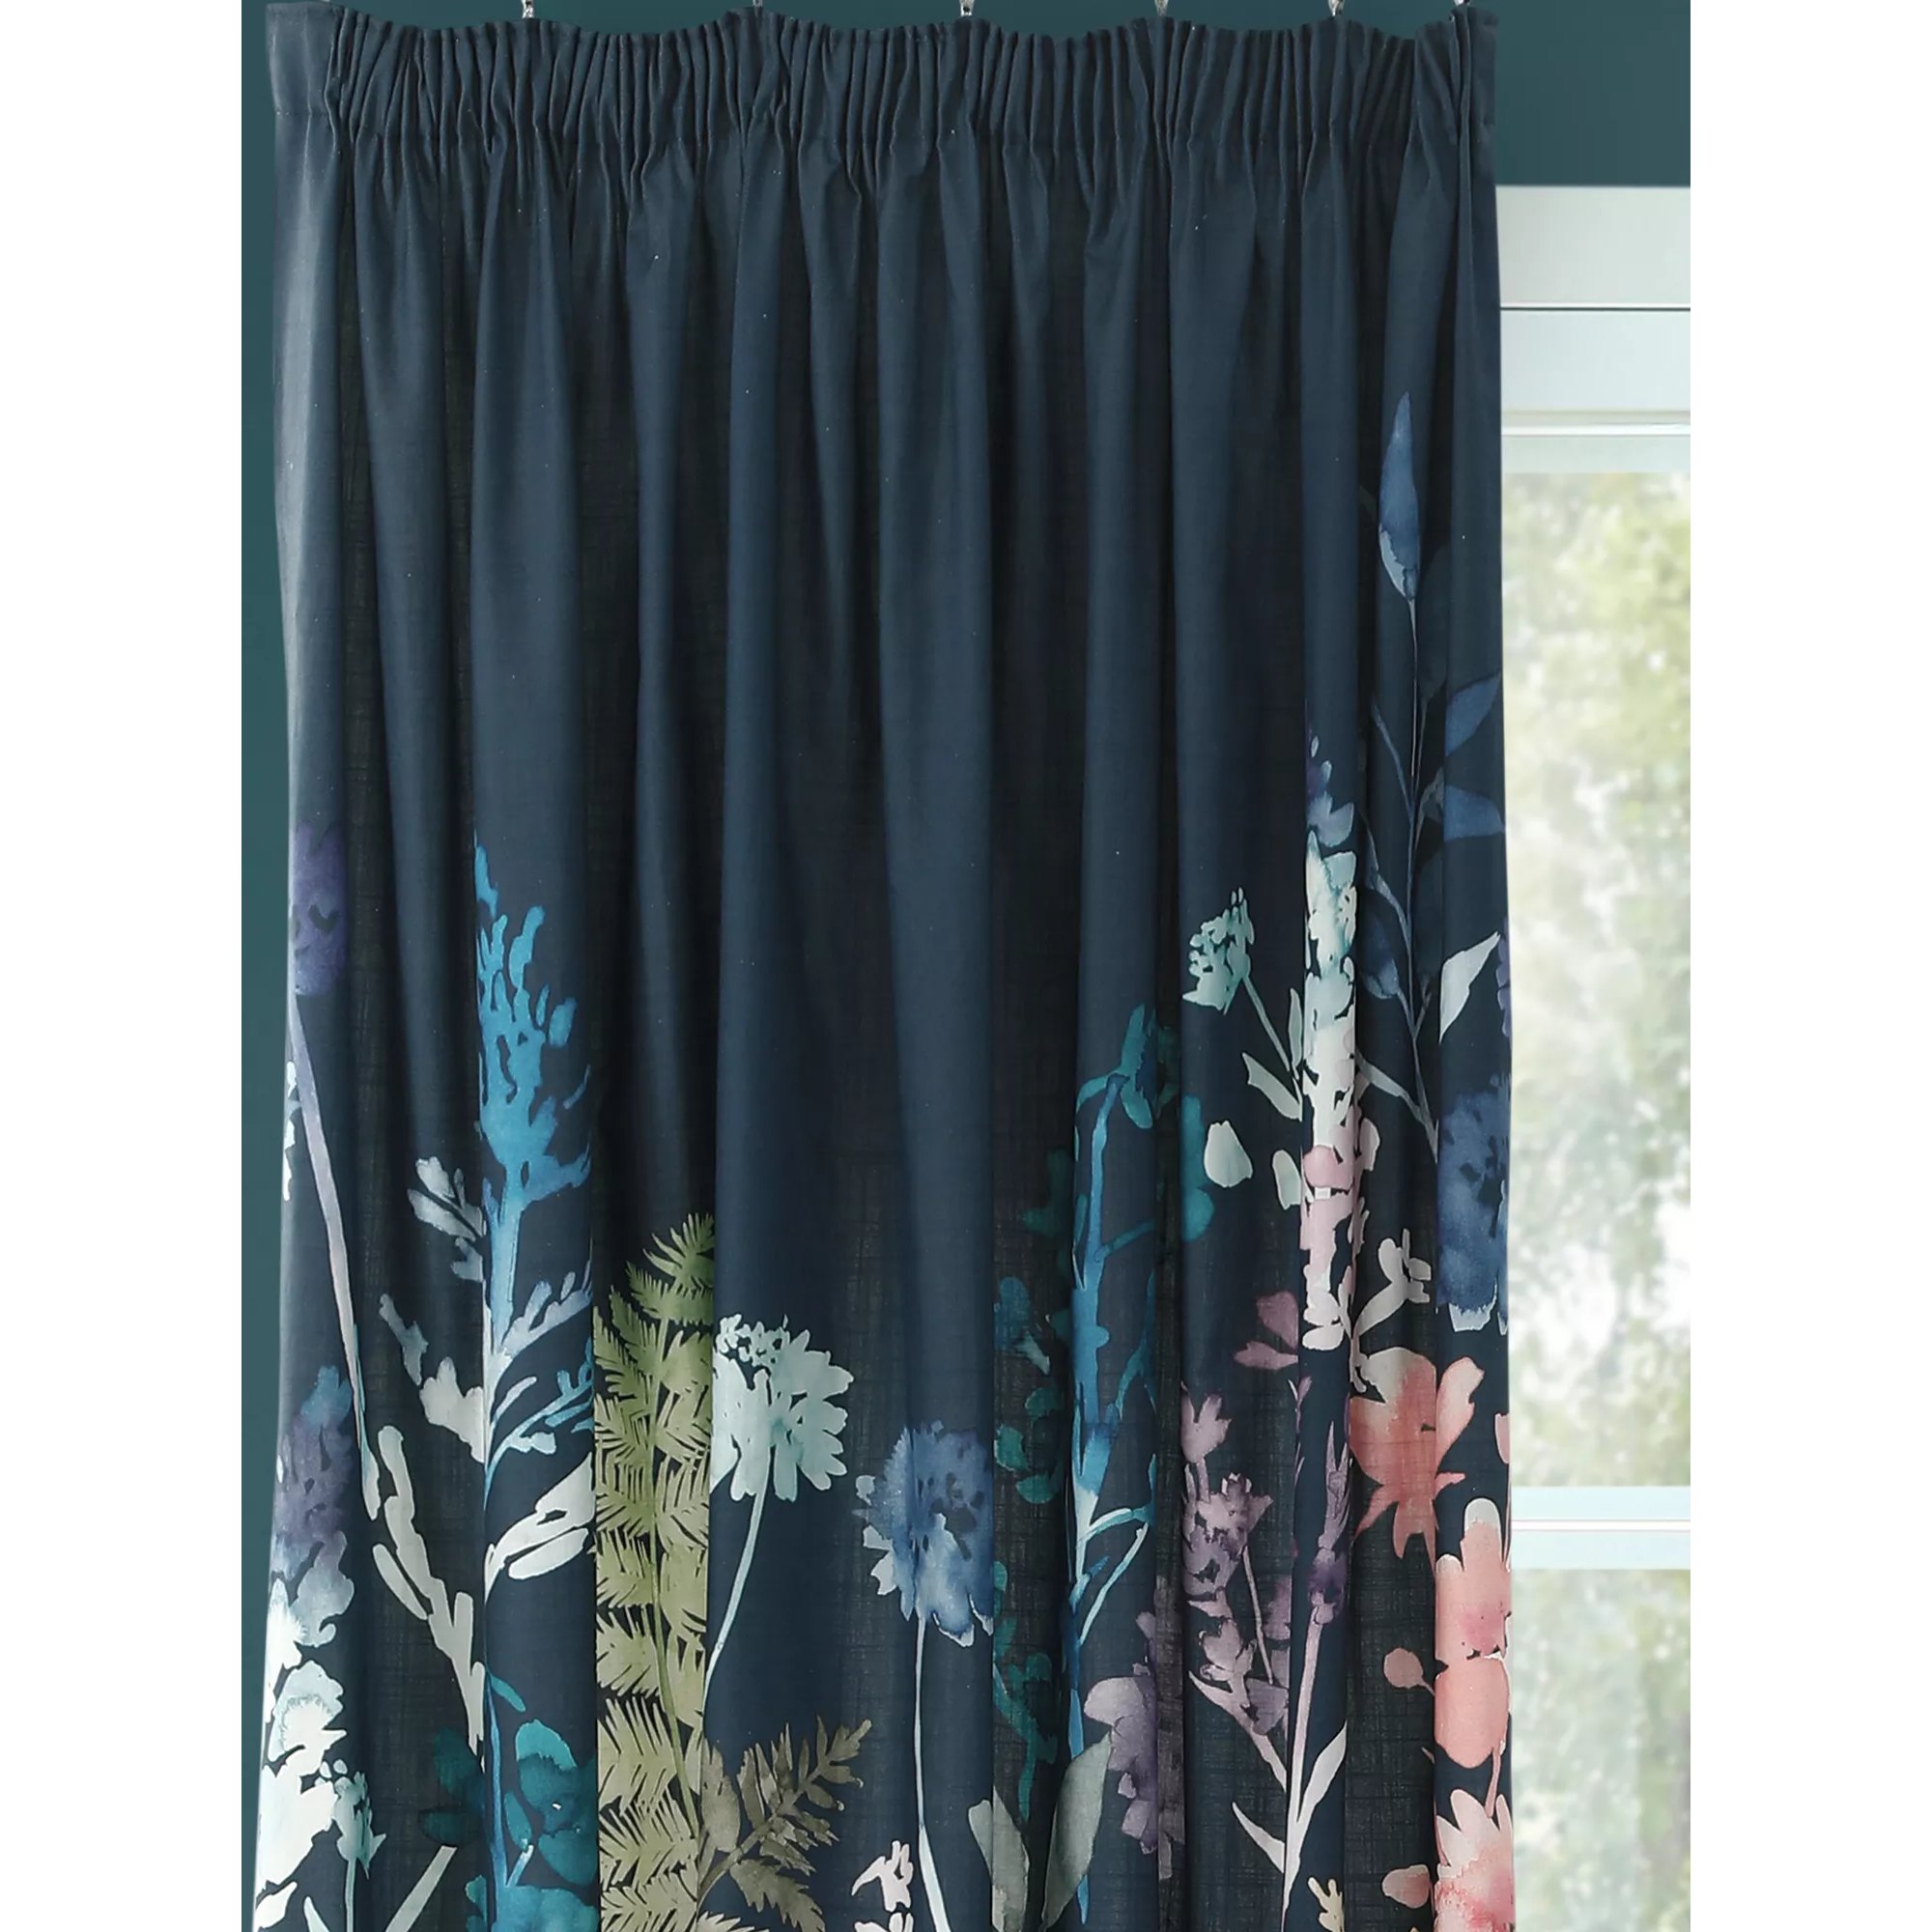 Bluebellgray Peggy Pair Lined Pencil, Bluebellgray Shower Curtain